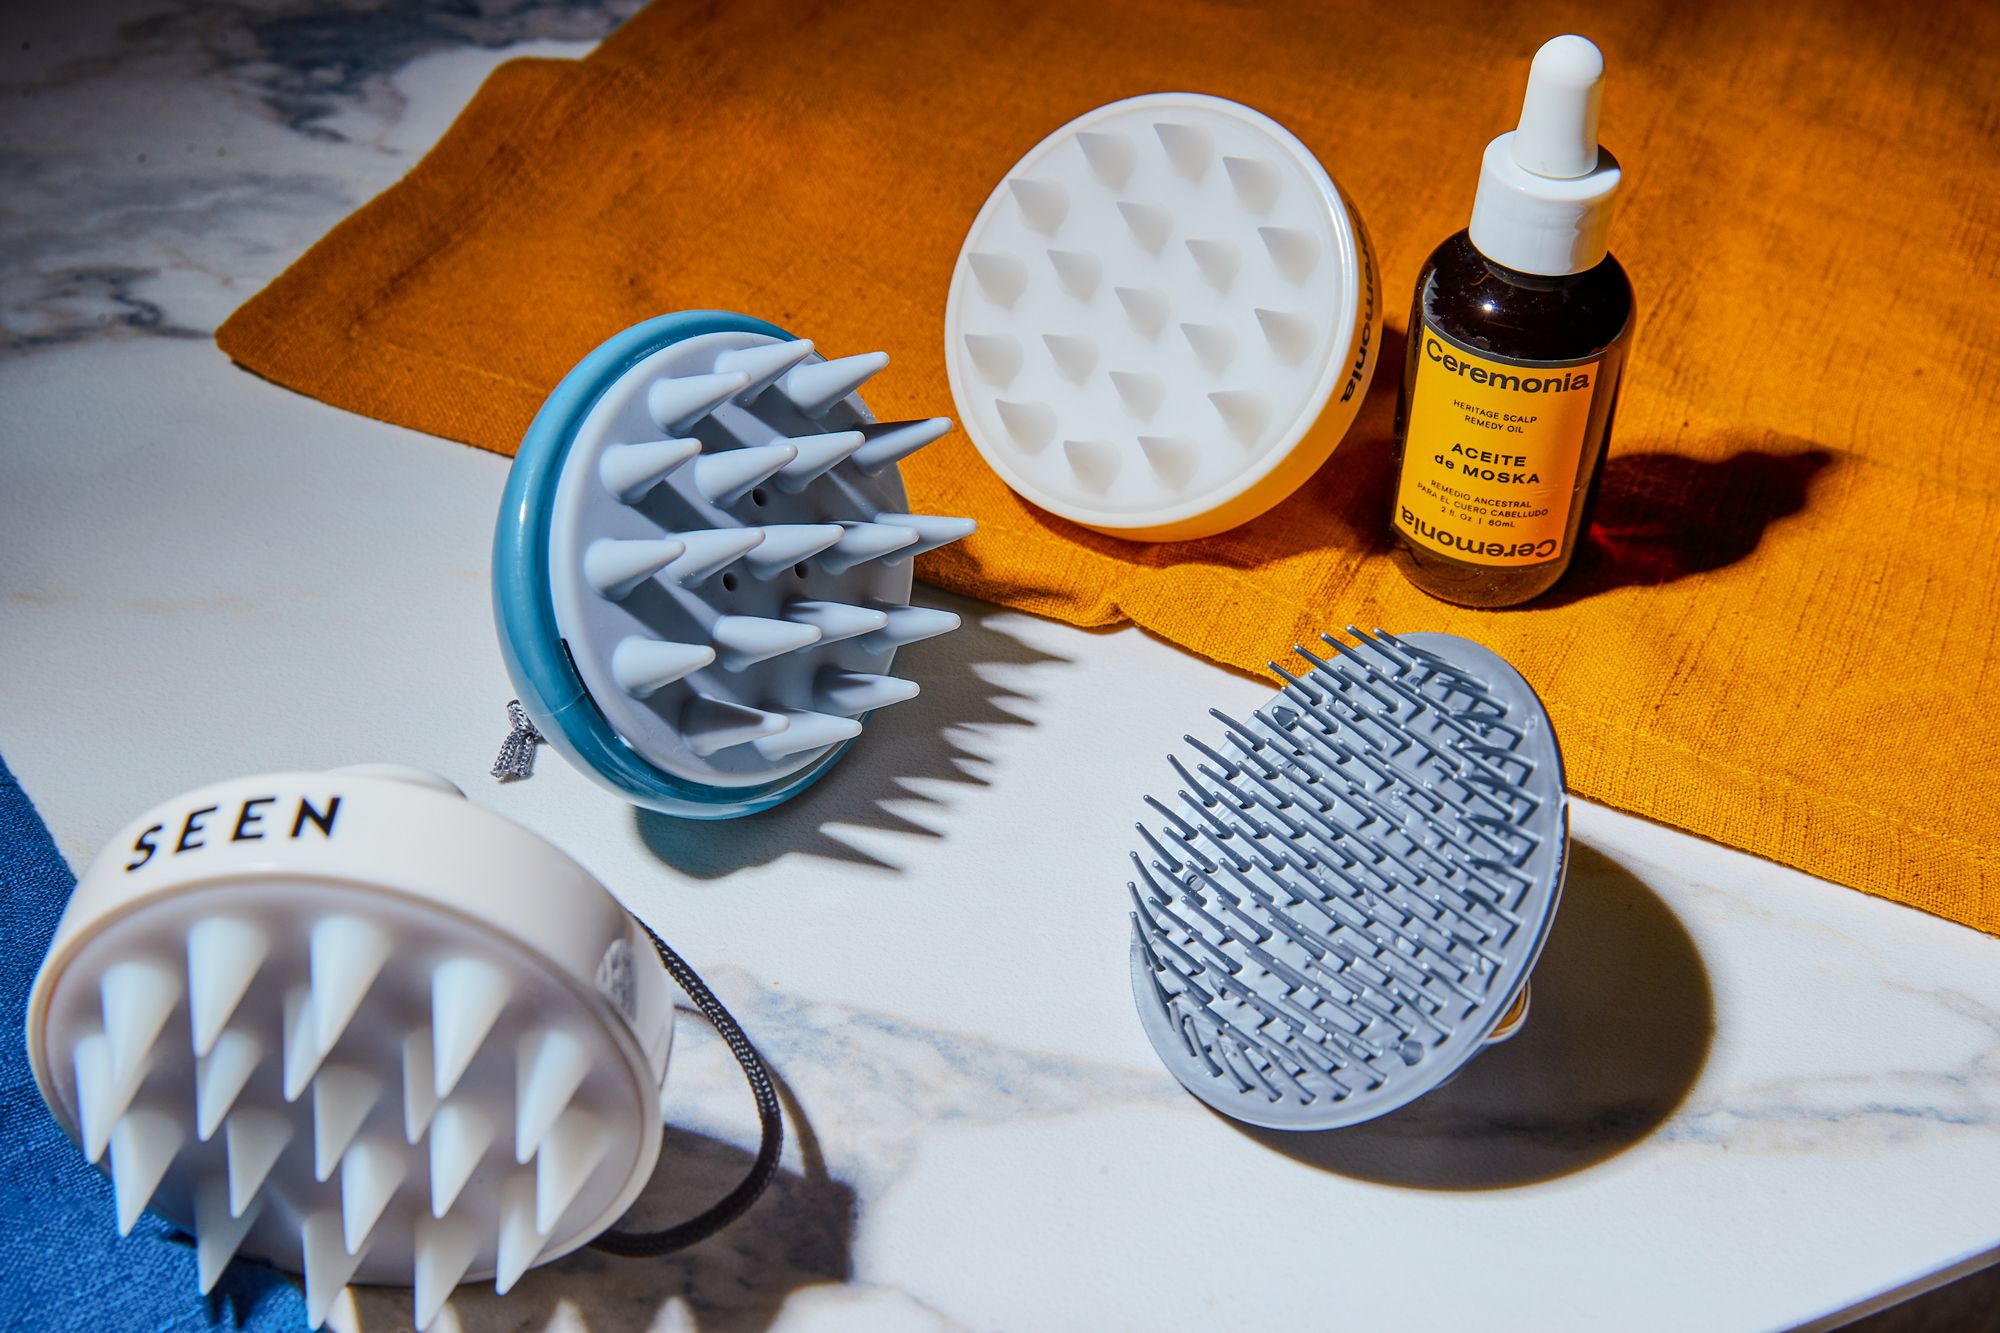 11 Best Paddle Brushes 2023 for Smooth, Frizz-Free Hair, According